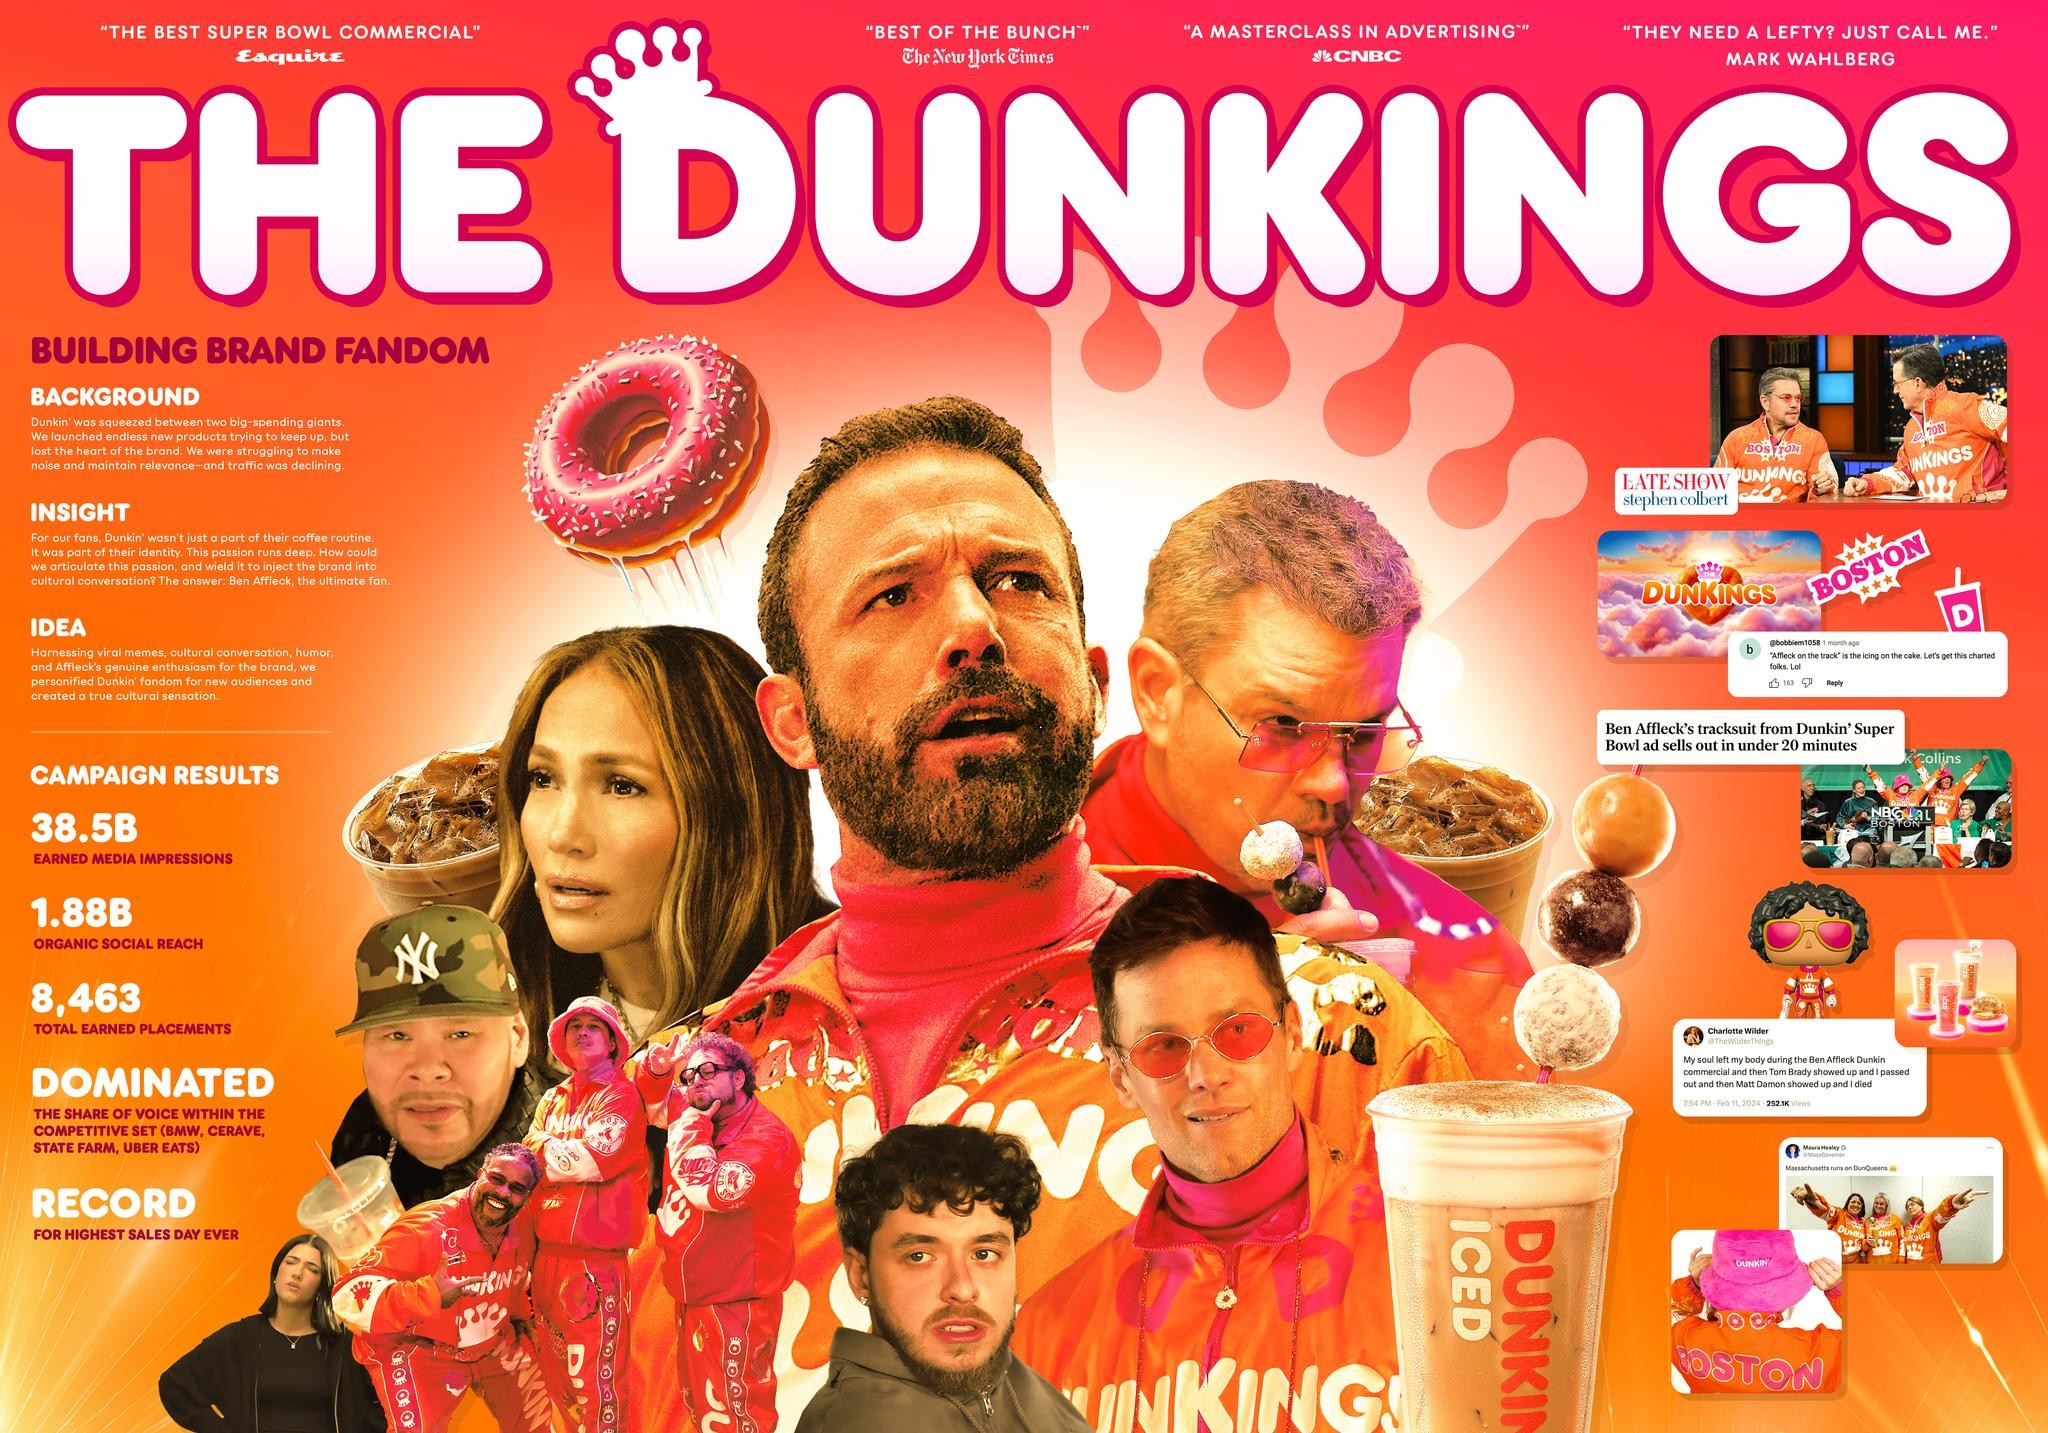 DUNKIN' PRESENTS: THE DUNKINGS